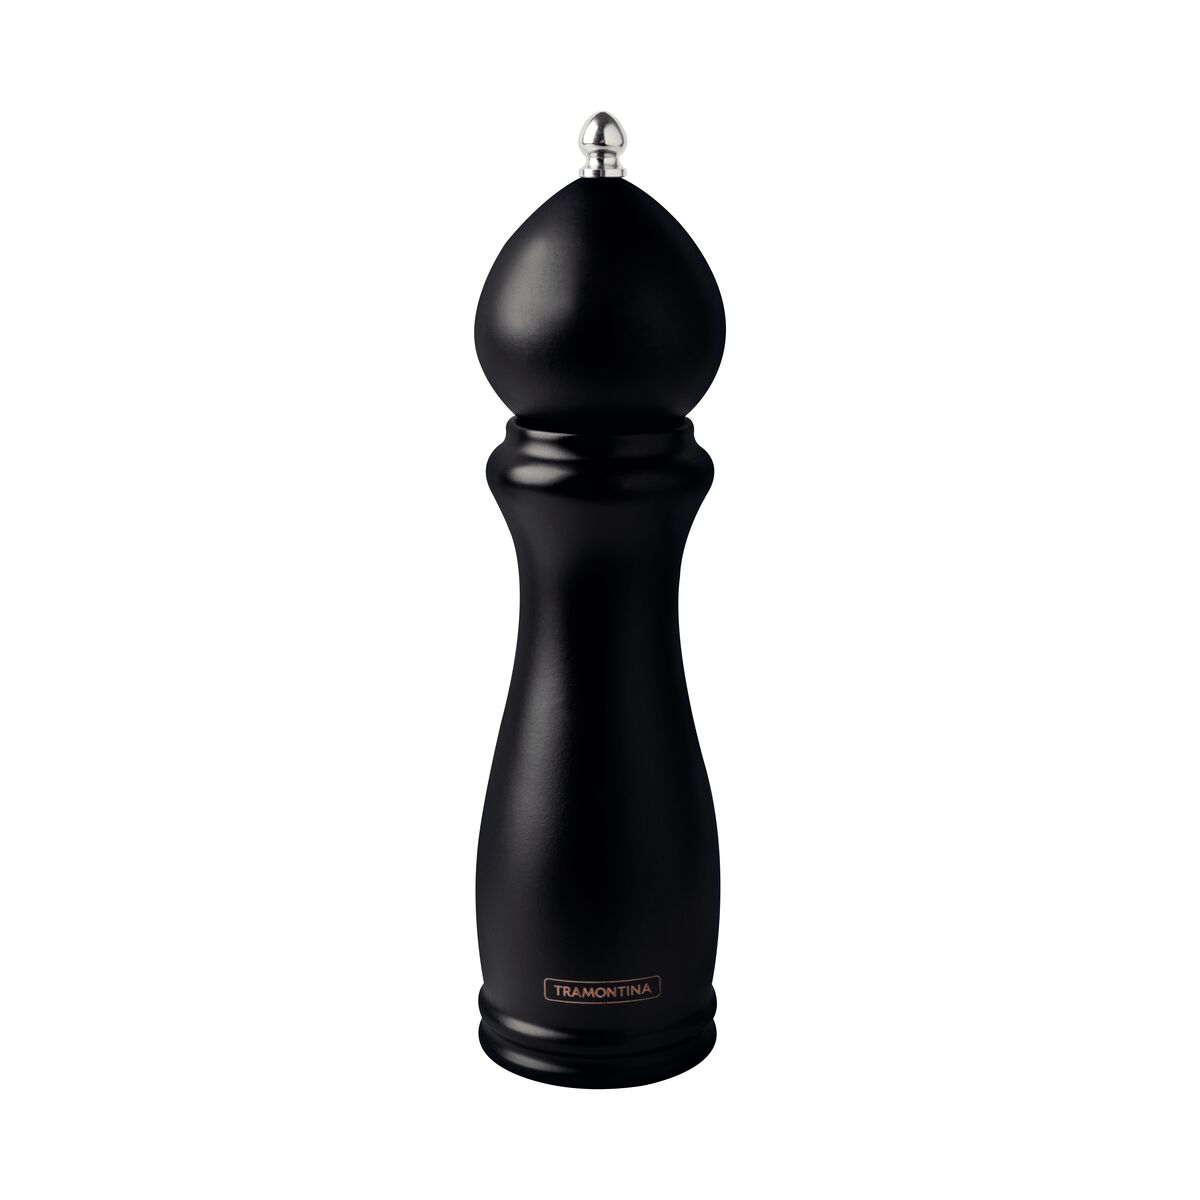 Tramontina Churrasco Black Salt and Pepper Mill in Ceramic with an 8" Wooden Container